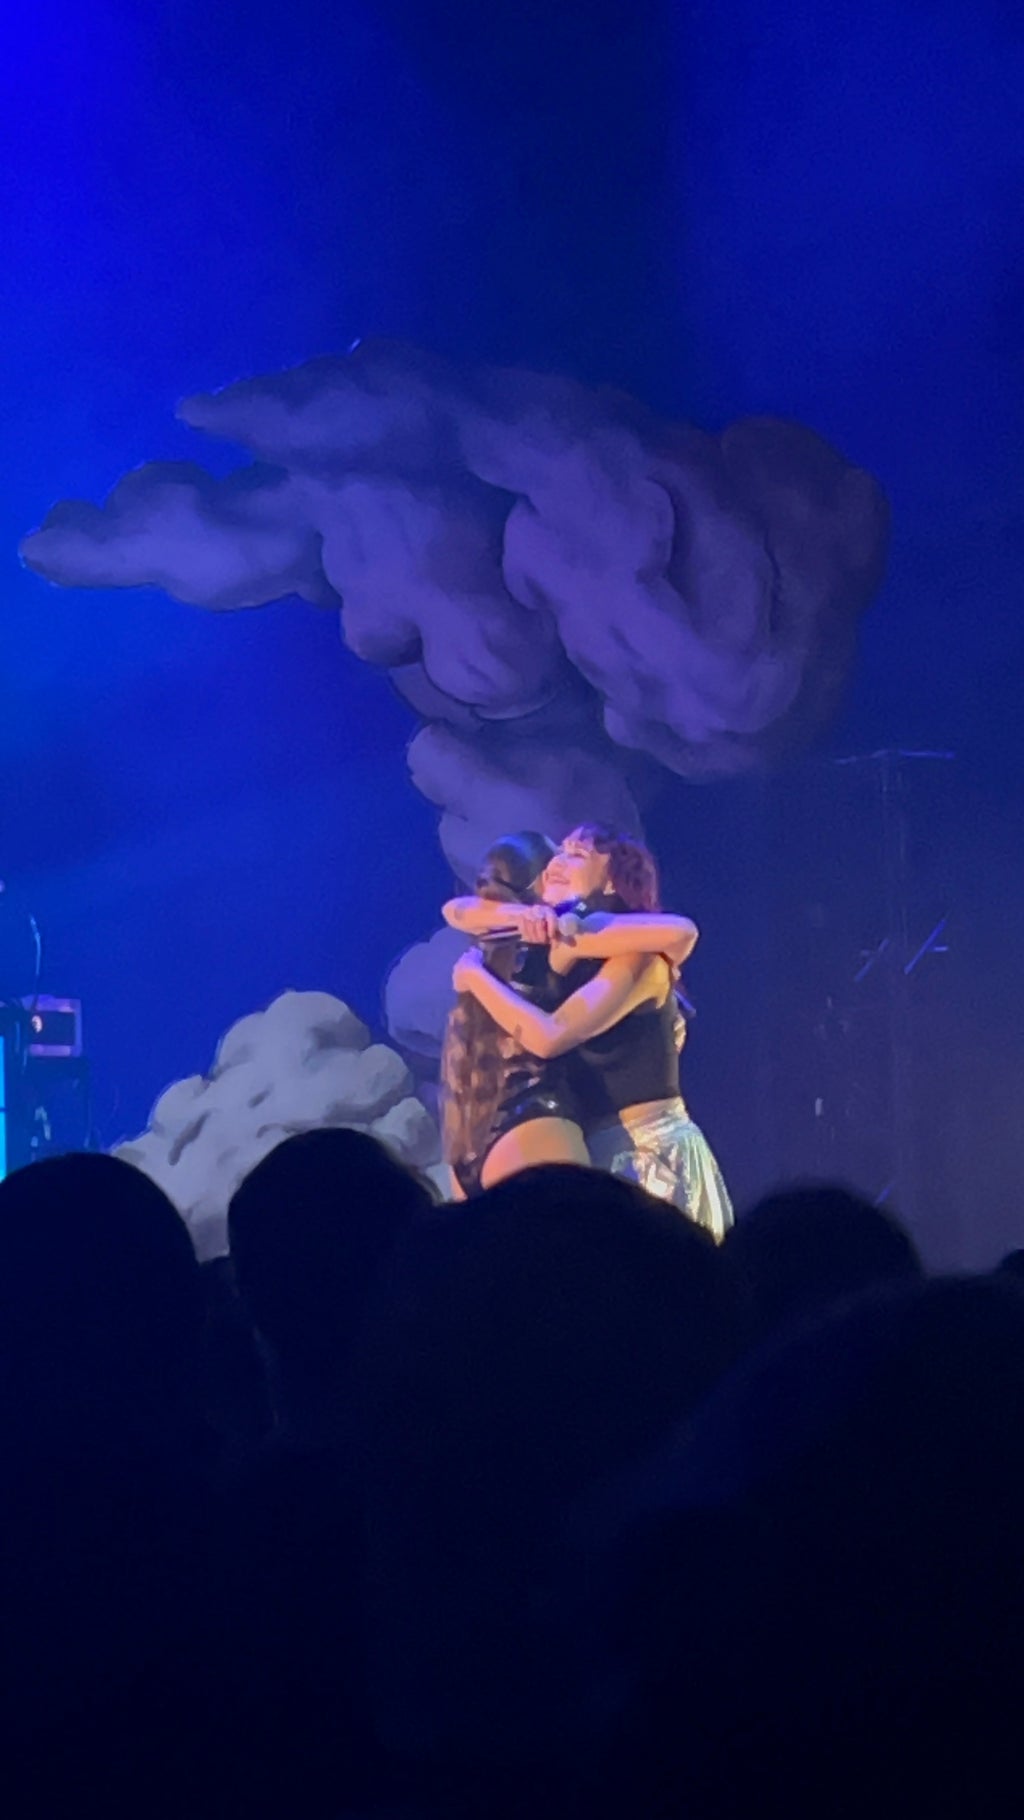 Two woman hugging on stage